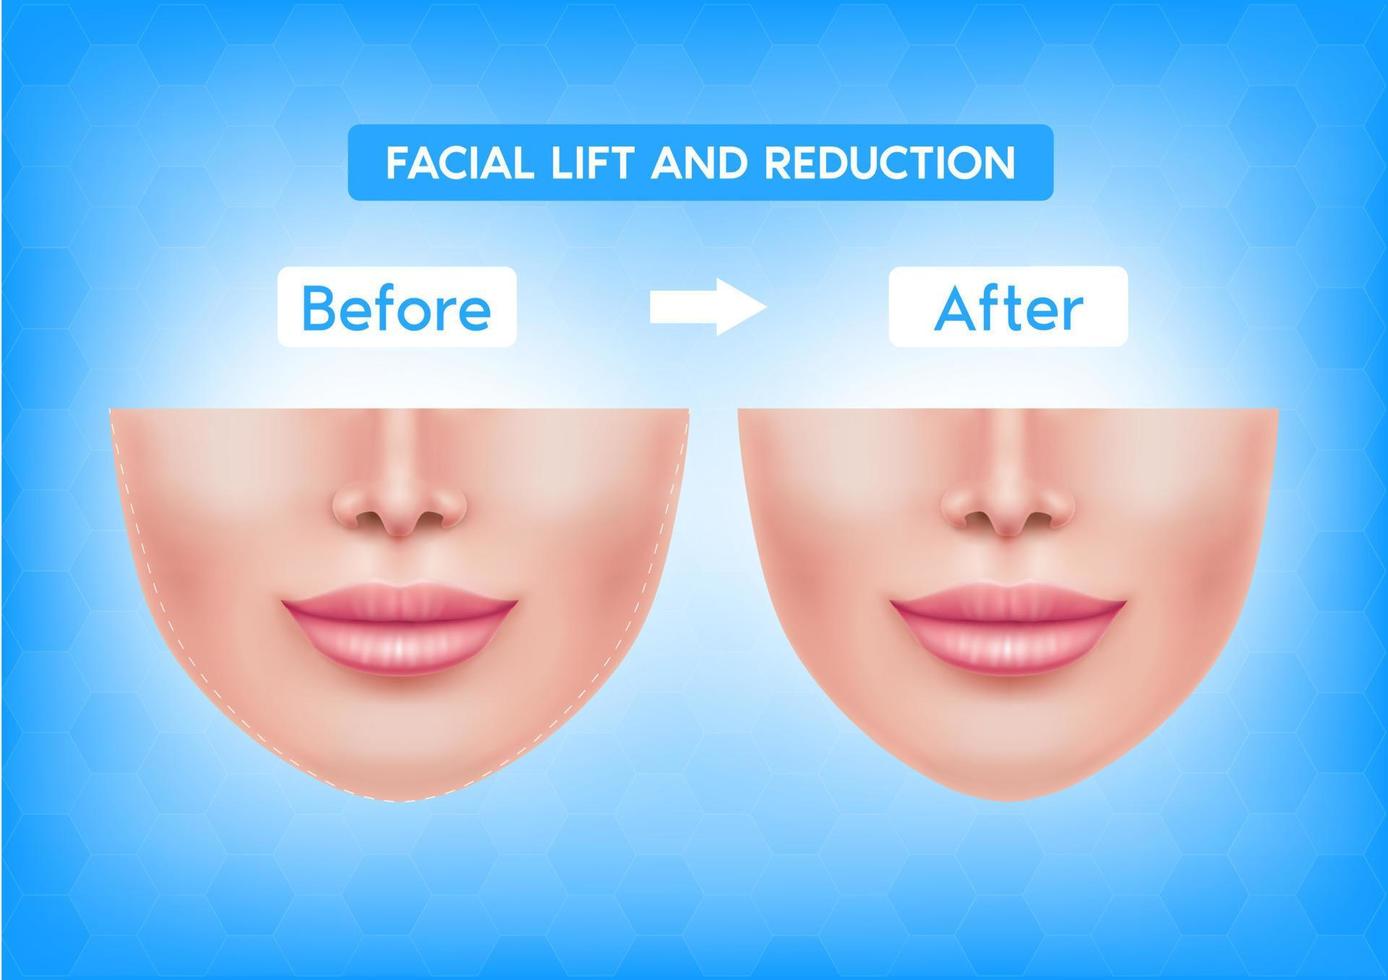 White female face before after plastic surgery jaw reduction and botox injections facial lift and reduction. For advertising of plastic surgery. Medical and beauty concept. Vector EPS10 illustration.